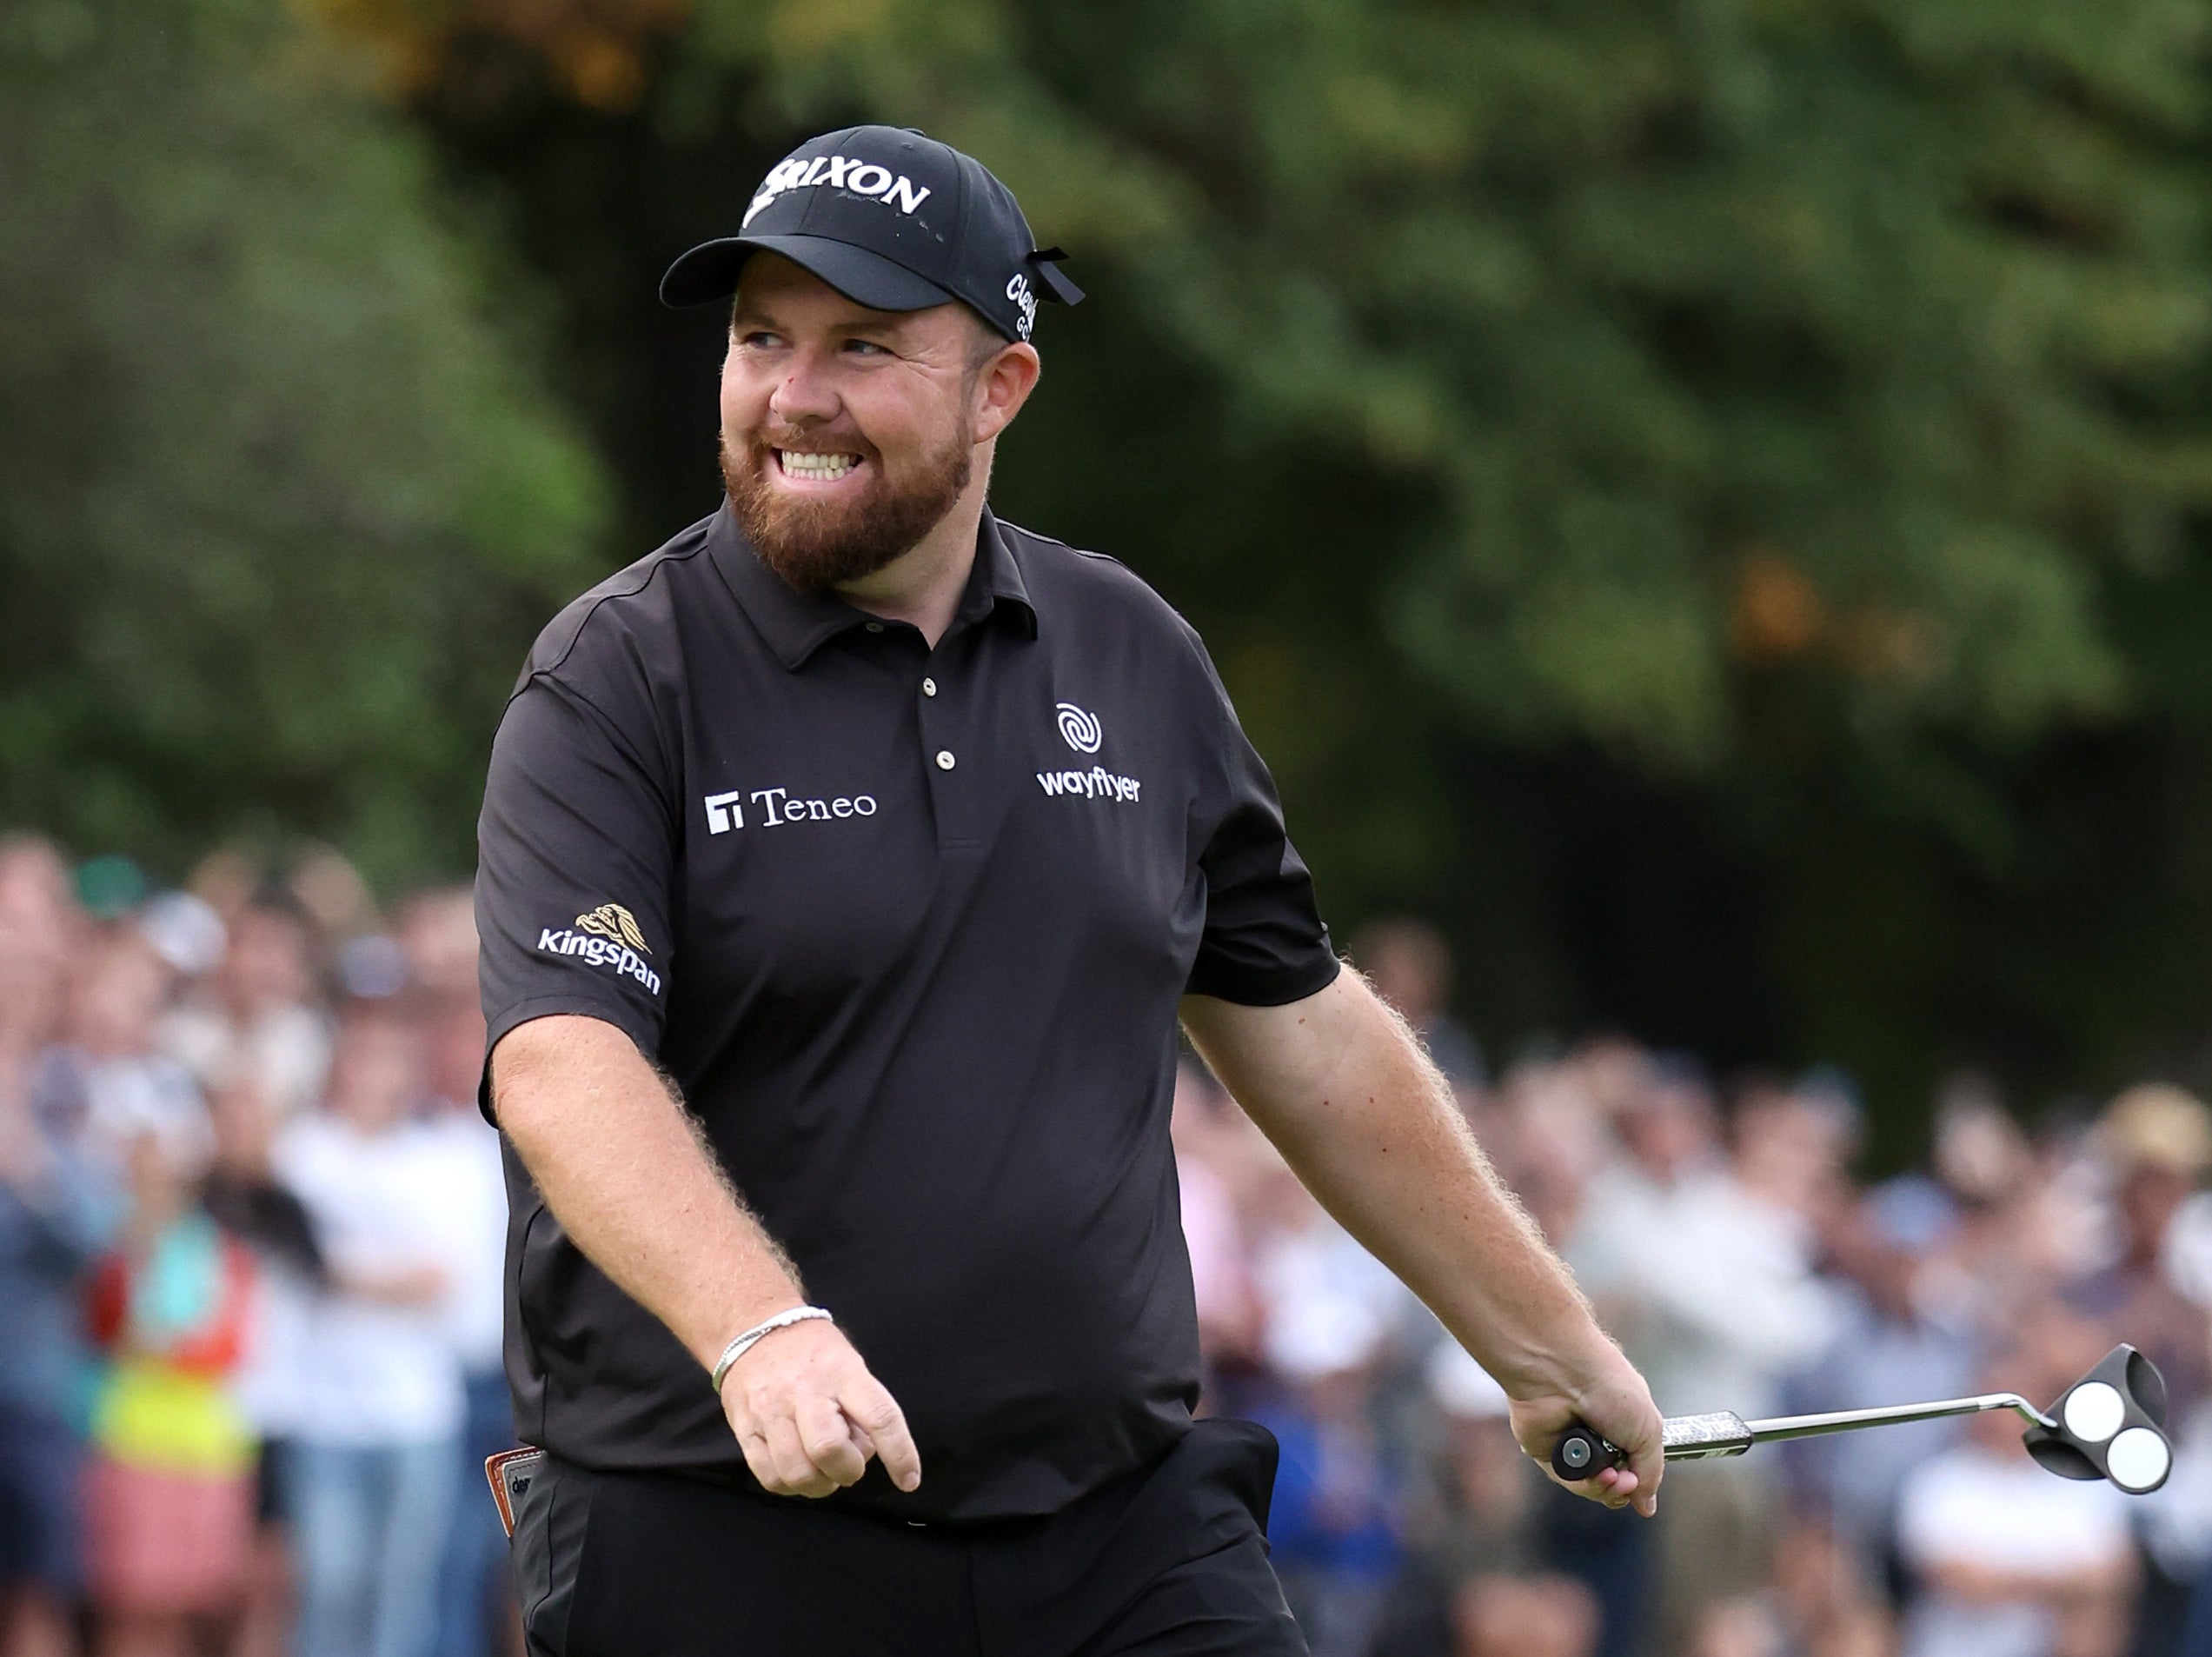 Shane Lowry should thrive in the cauldron-like atmosphere of the Ryder Cup